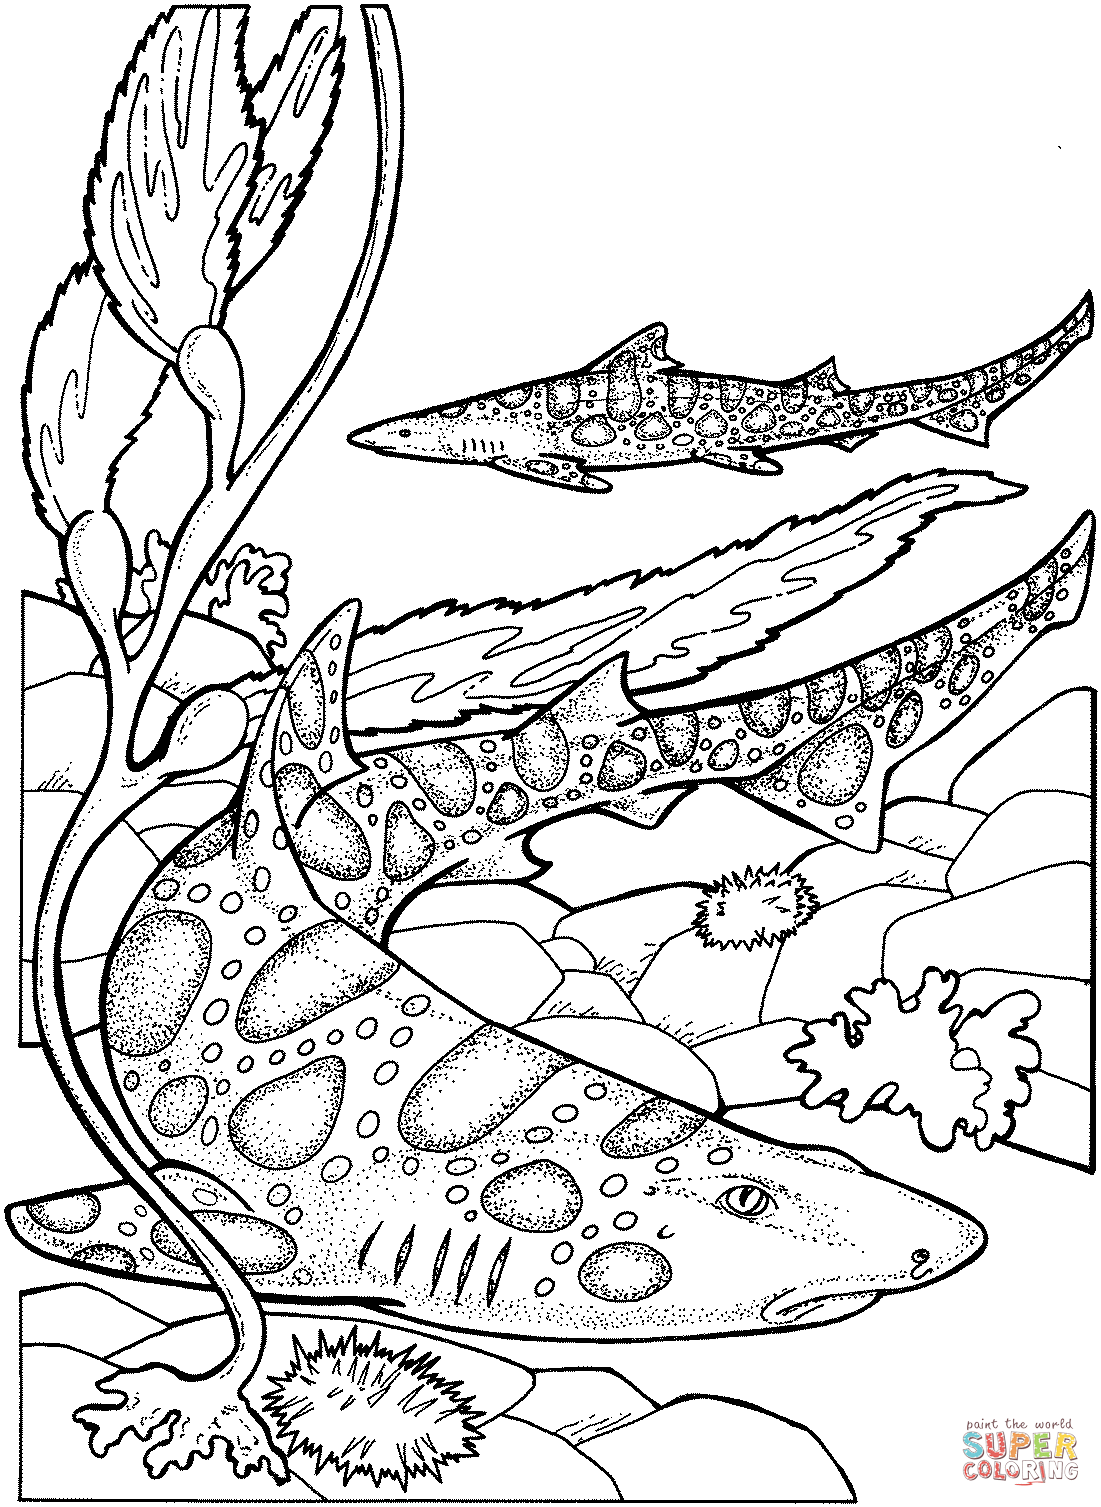 Leopard Sharks coloring page | Free Printable Coloring Pages